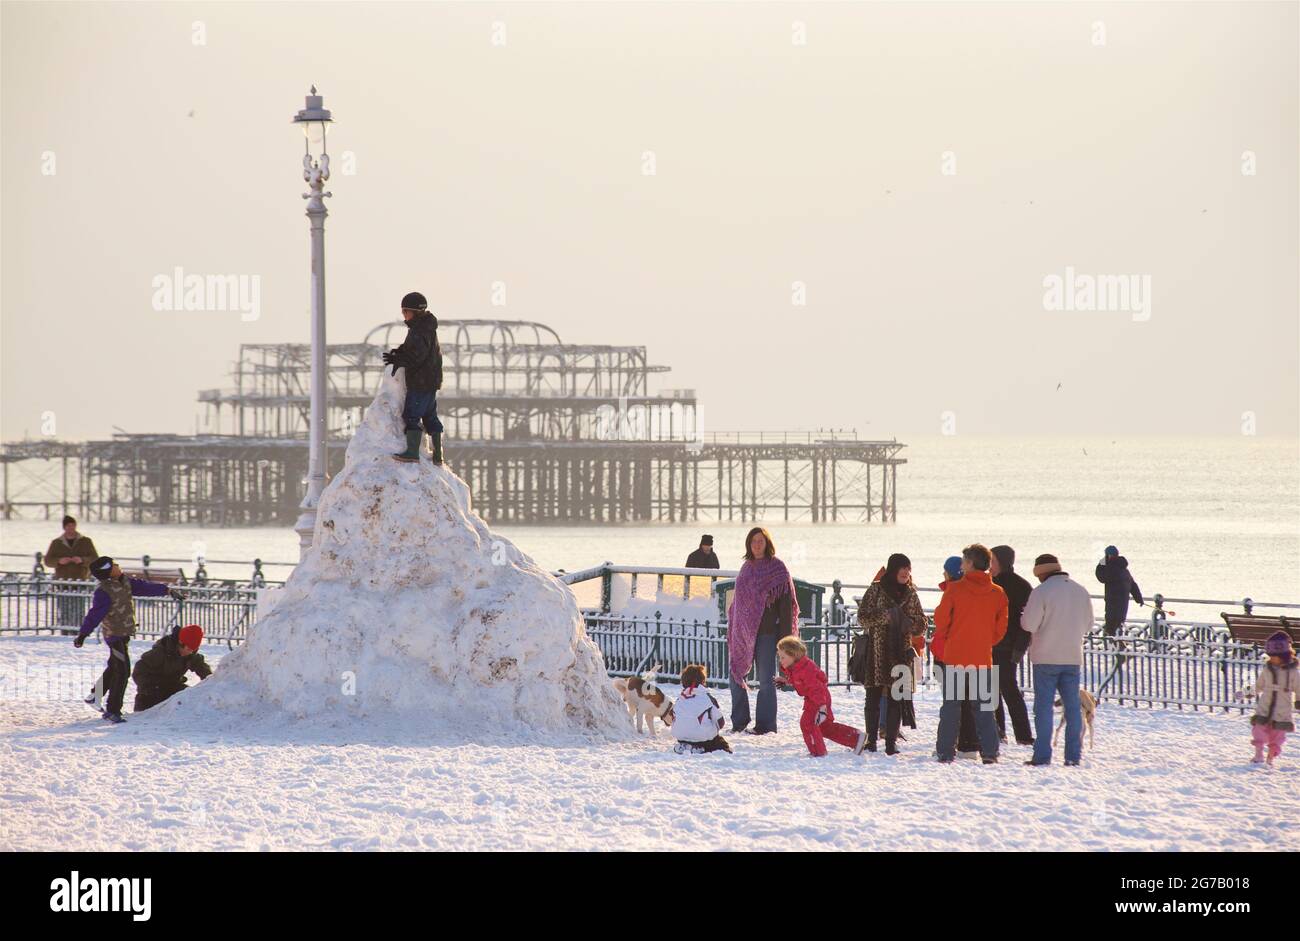 Winter by the seaside. Kids and adults in the snow, building a snow 'stupa' snowman on Hove Lawns ... Brighton's dilapidated West Pier beyond. Brighton, England. Stock Photo